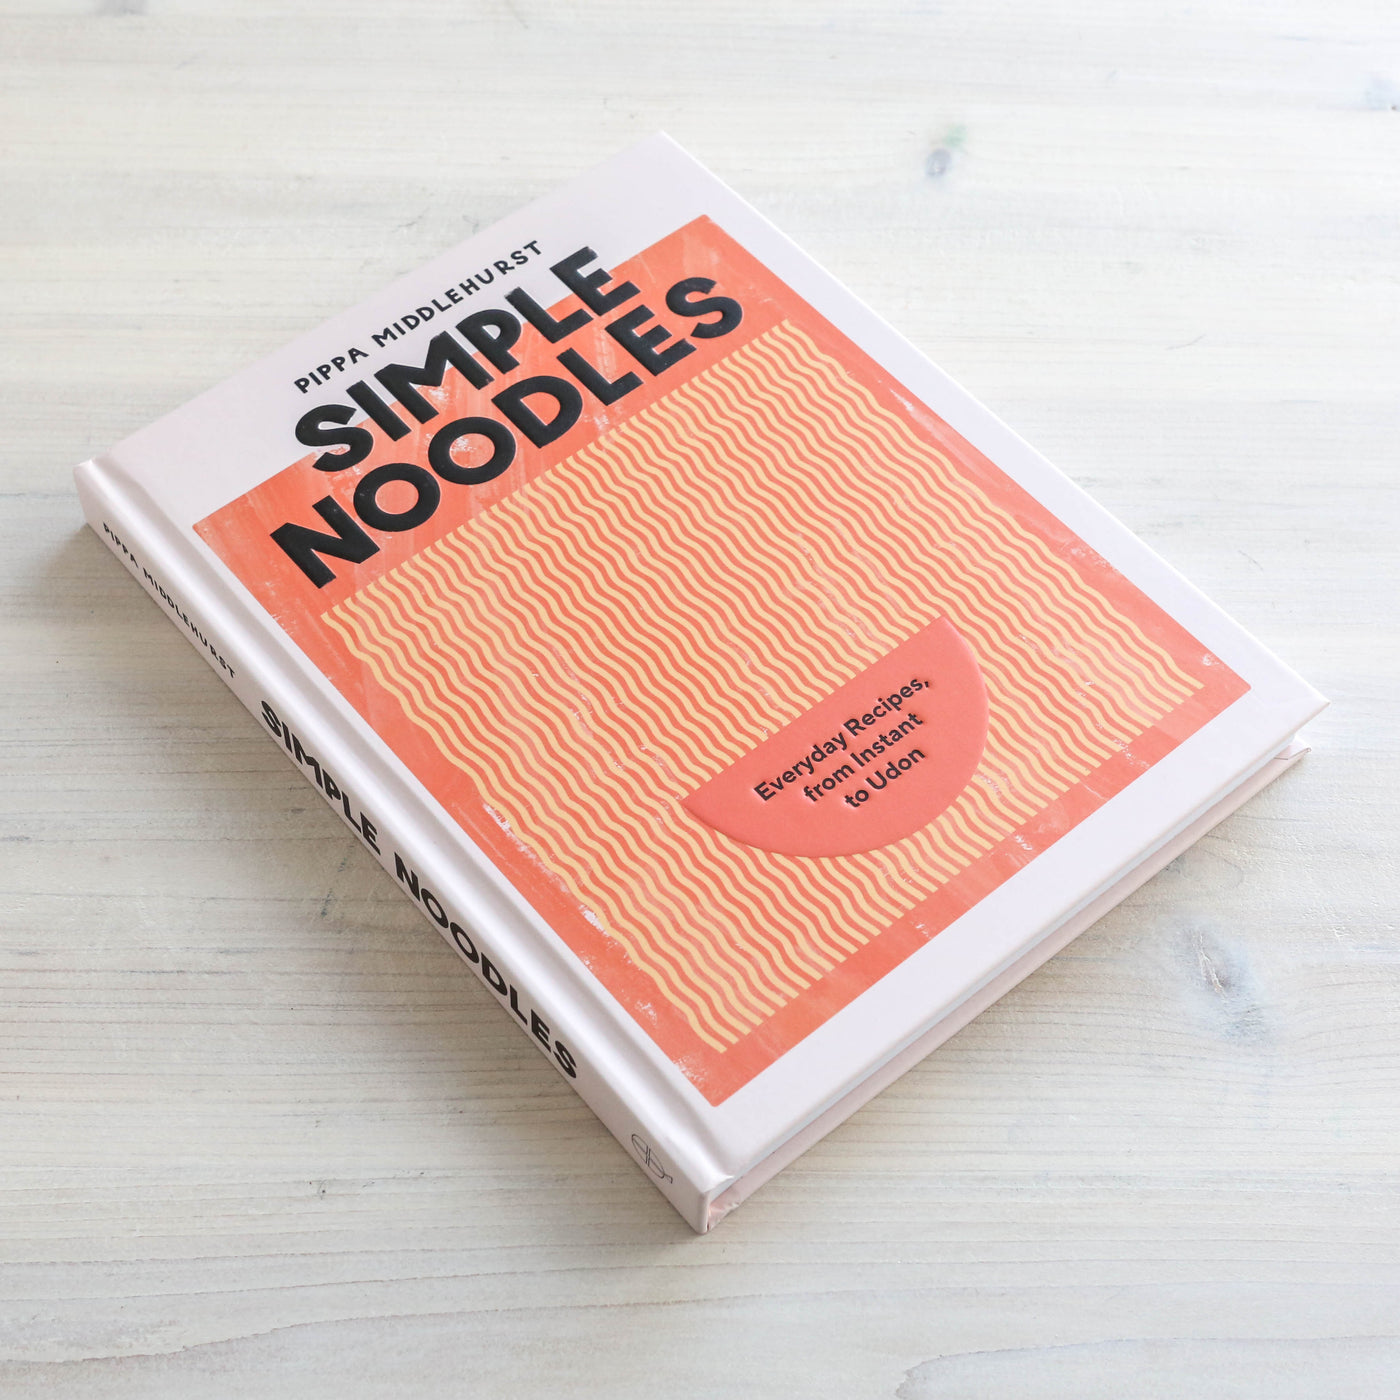 Simple Noodles : Everyday Recipes, from Instant to Udon